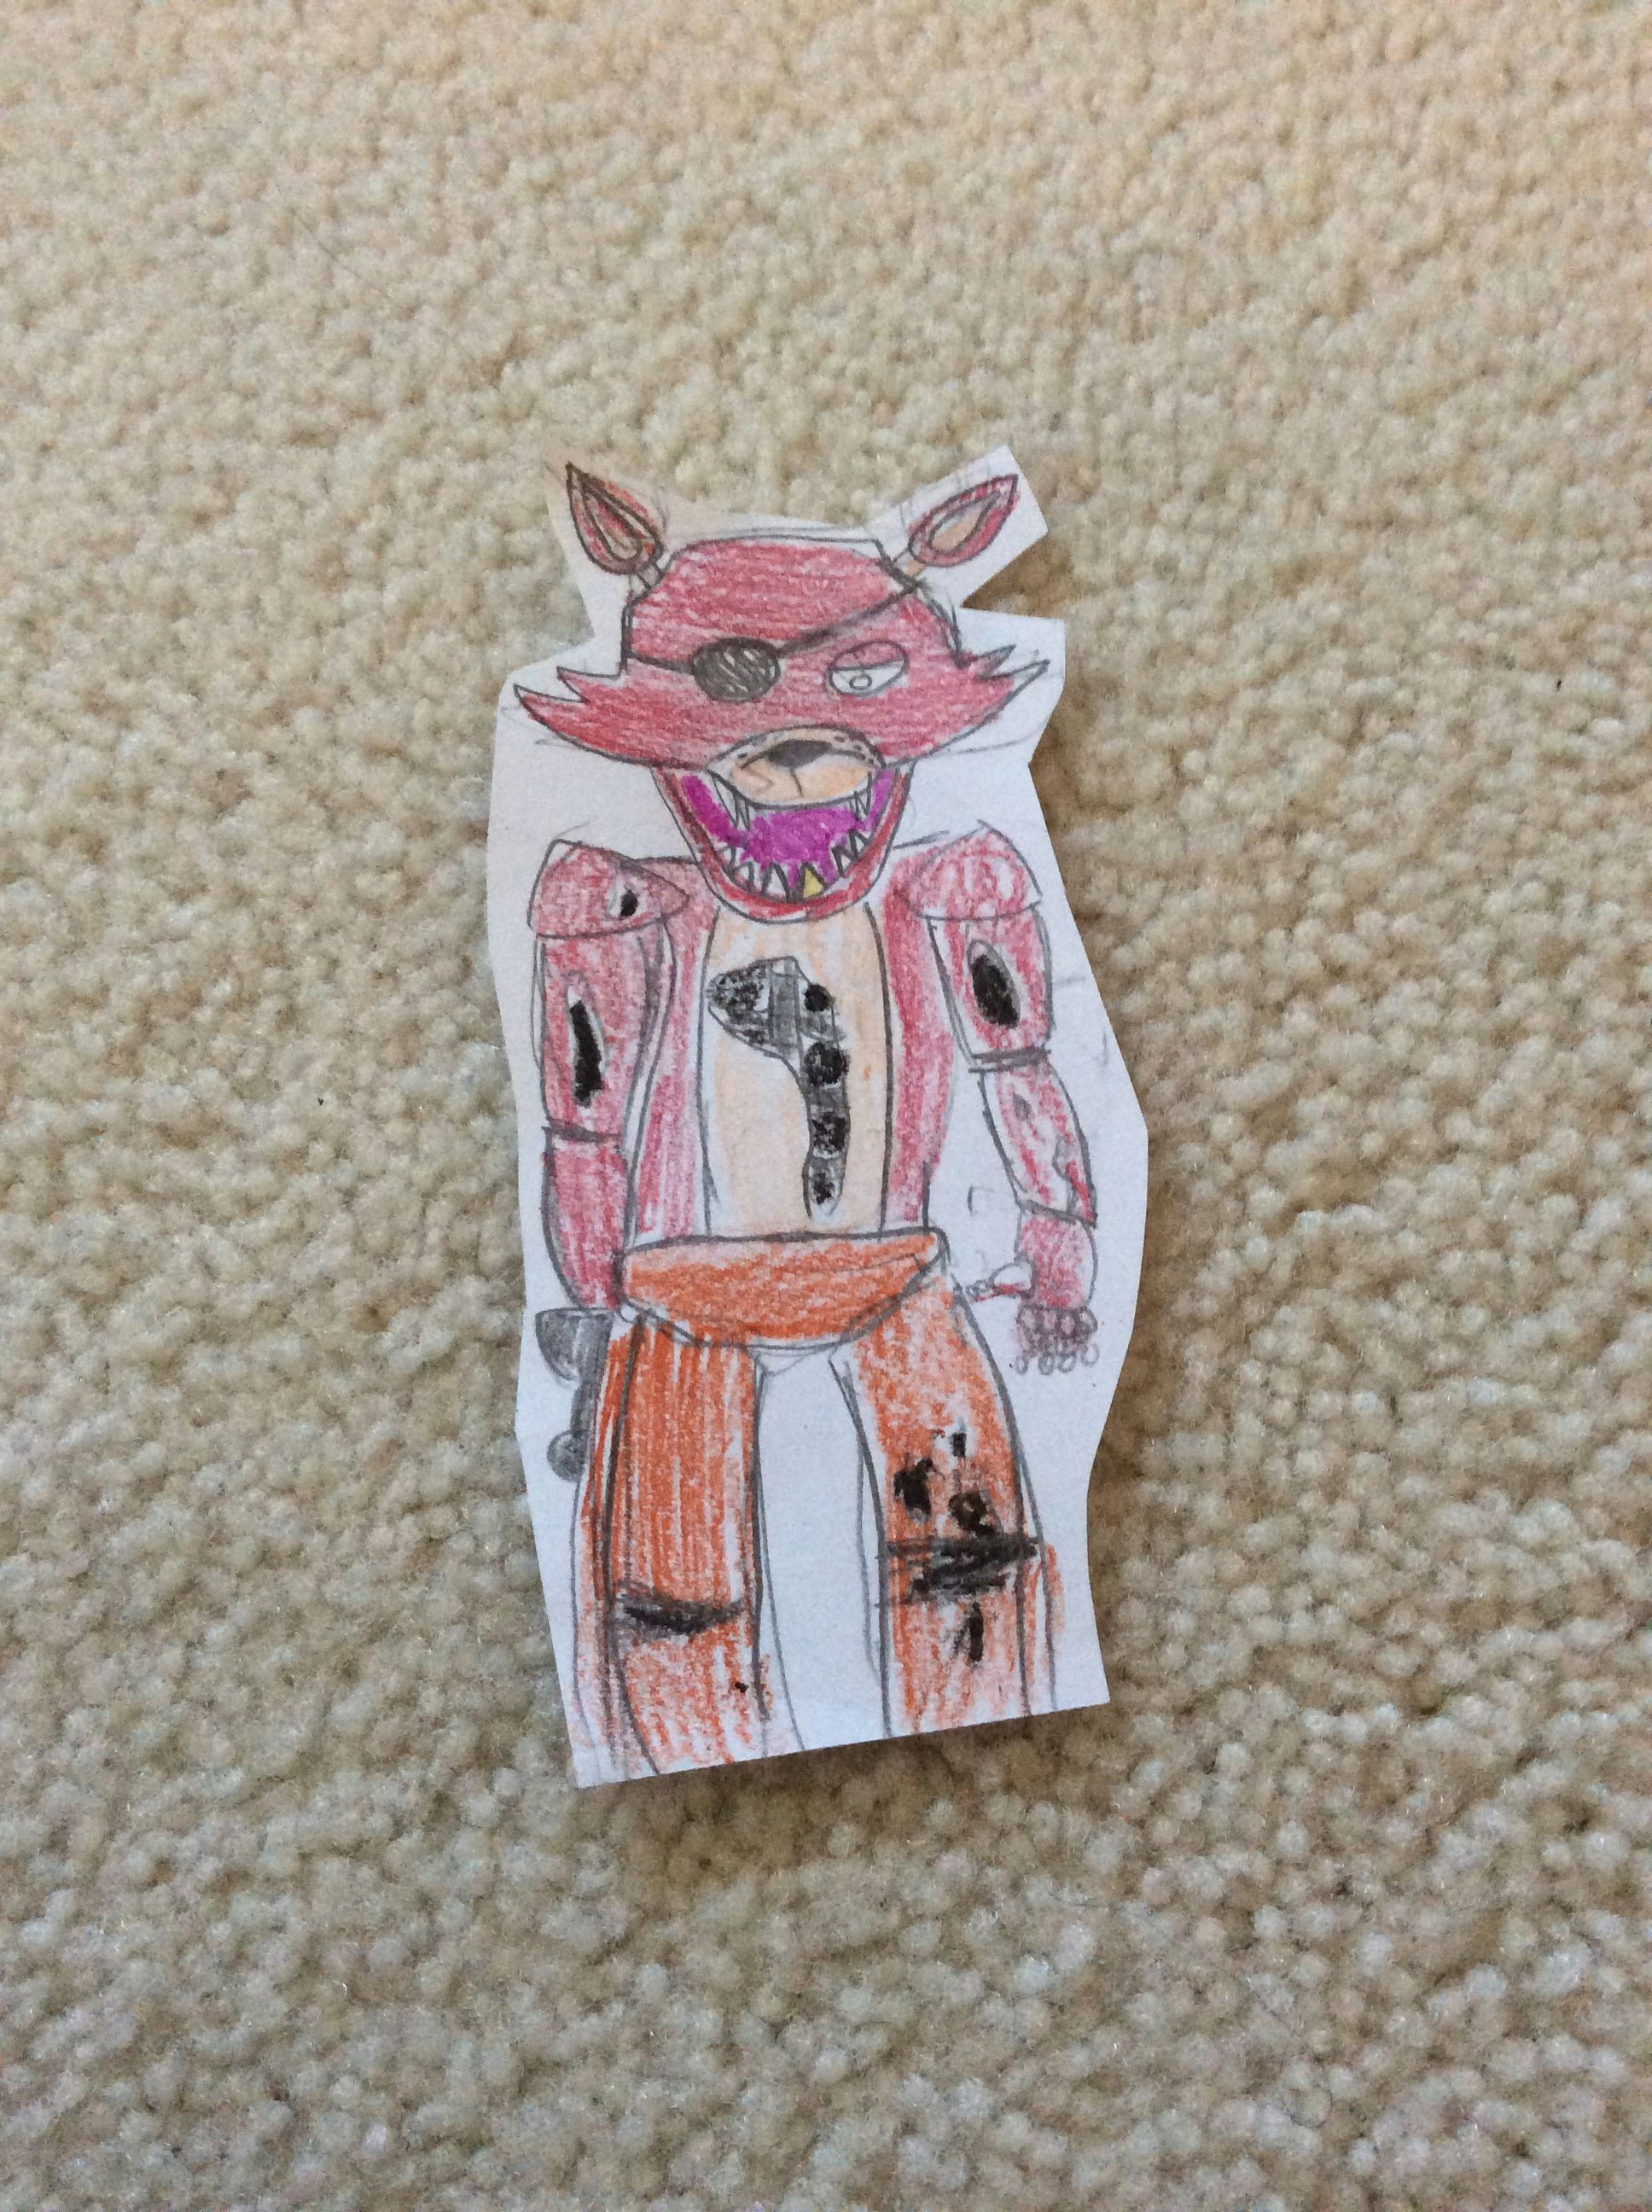 Fnaf 2 Anime Drawing My Drawing Of Foxy the Pirate From Five Nights at Freddy S and Five